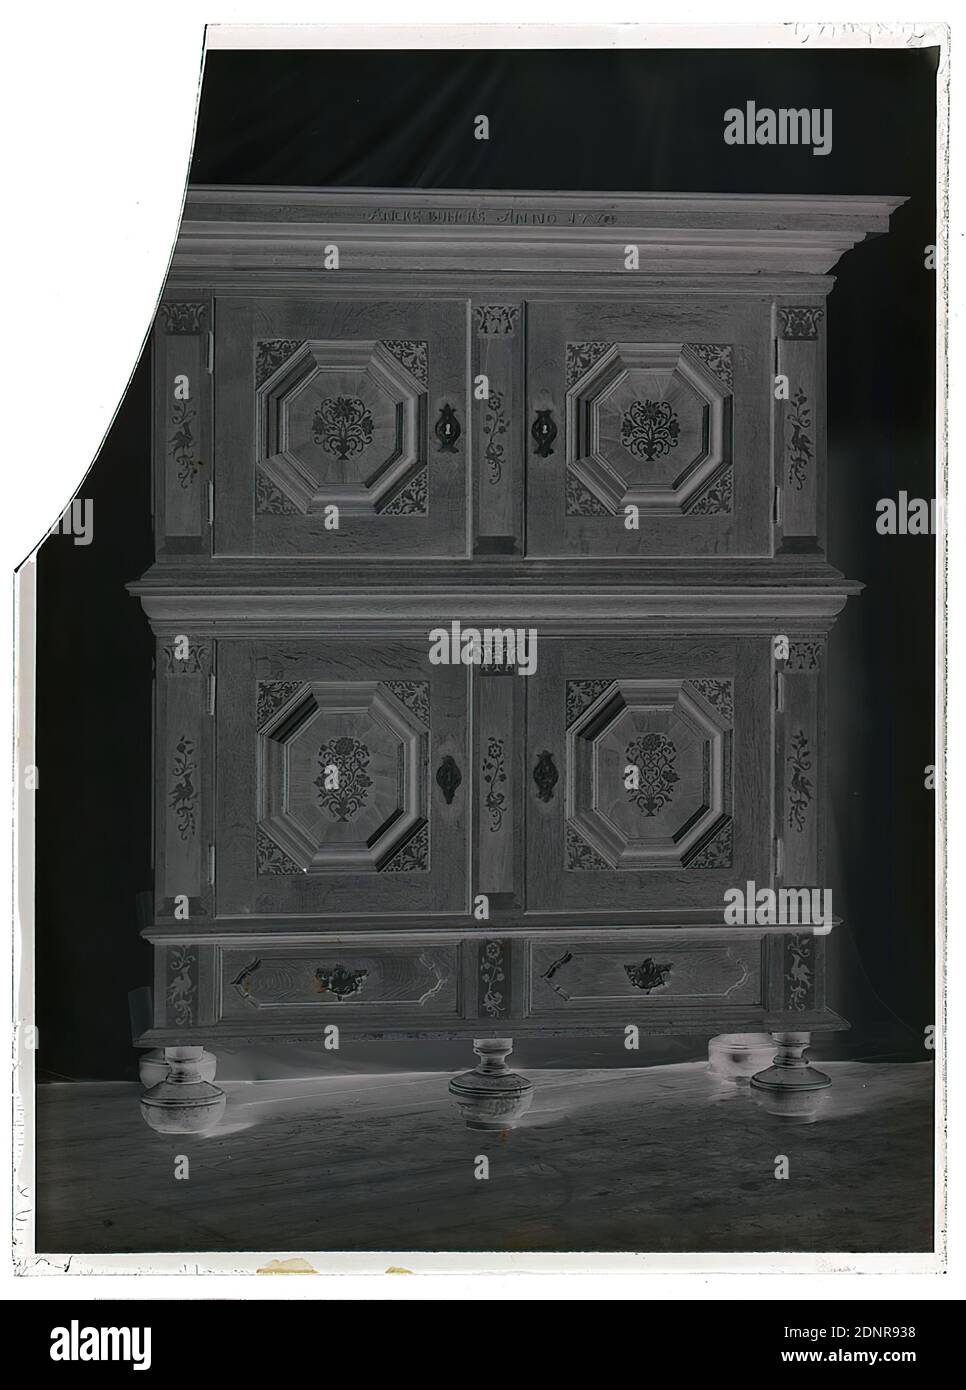 Wilhelm Weimar, Vierländer Schrank, glass negative, black and white negative process, total: height: 23,8 cm; width: 17,8 cm, work of applied art (wood, e.g. panelling), cabinet, floral ornaments, ornaments, animals as ornament, birds, work of applied art (metals Stock Photo